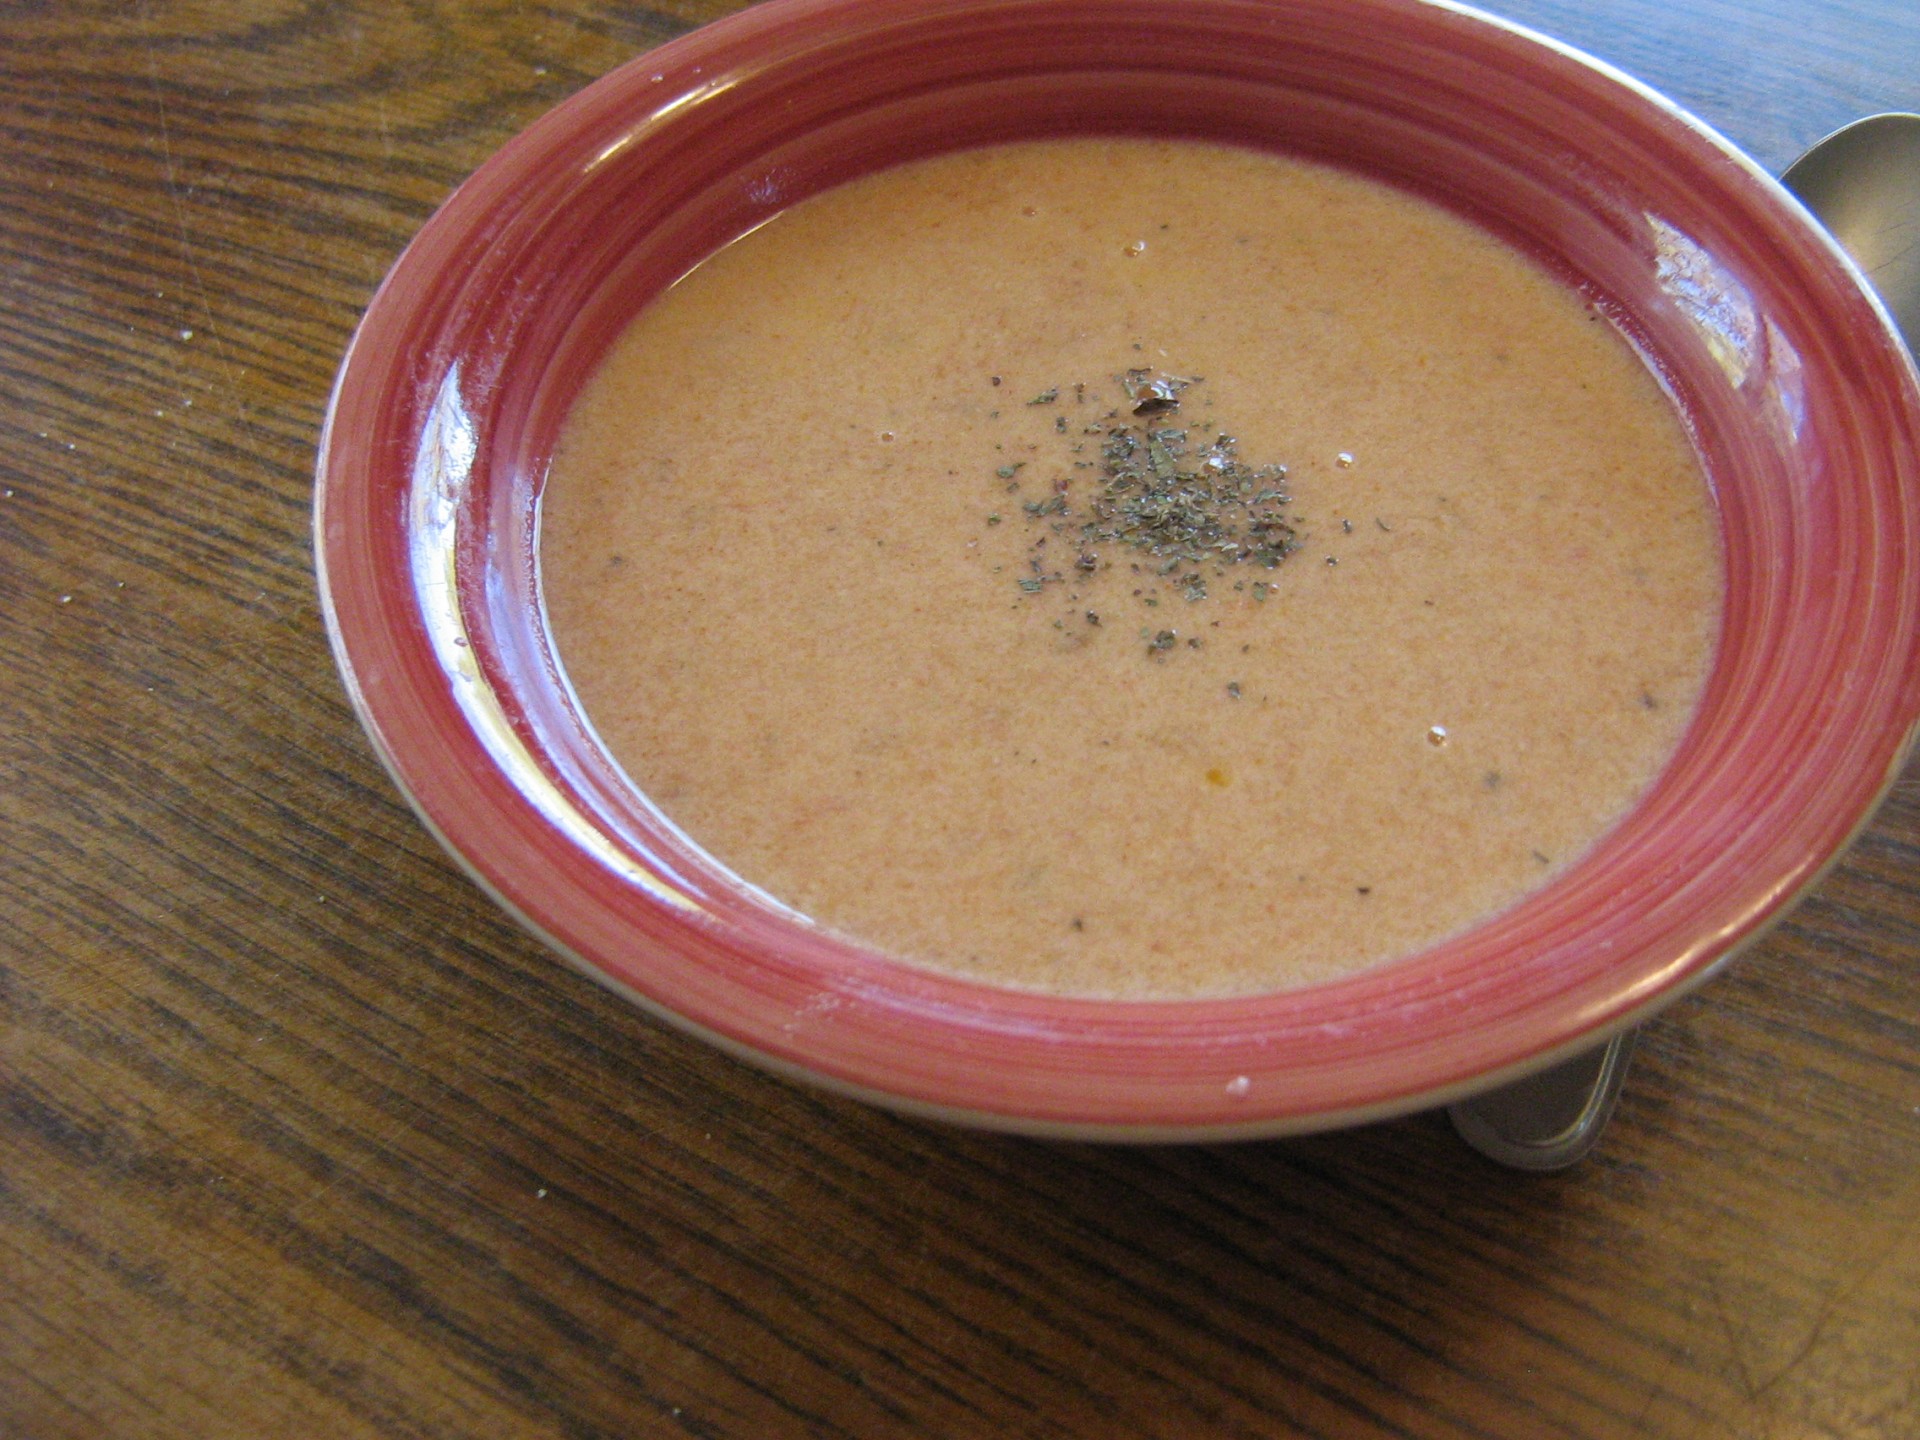 Herbed Tomato and Chickpea Soup